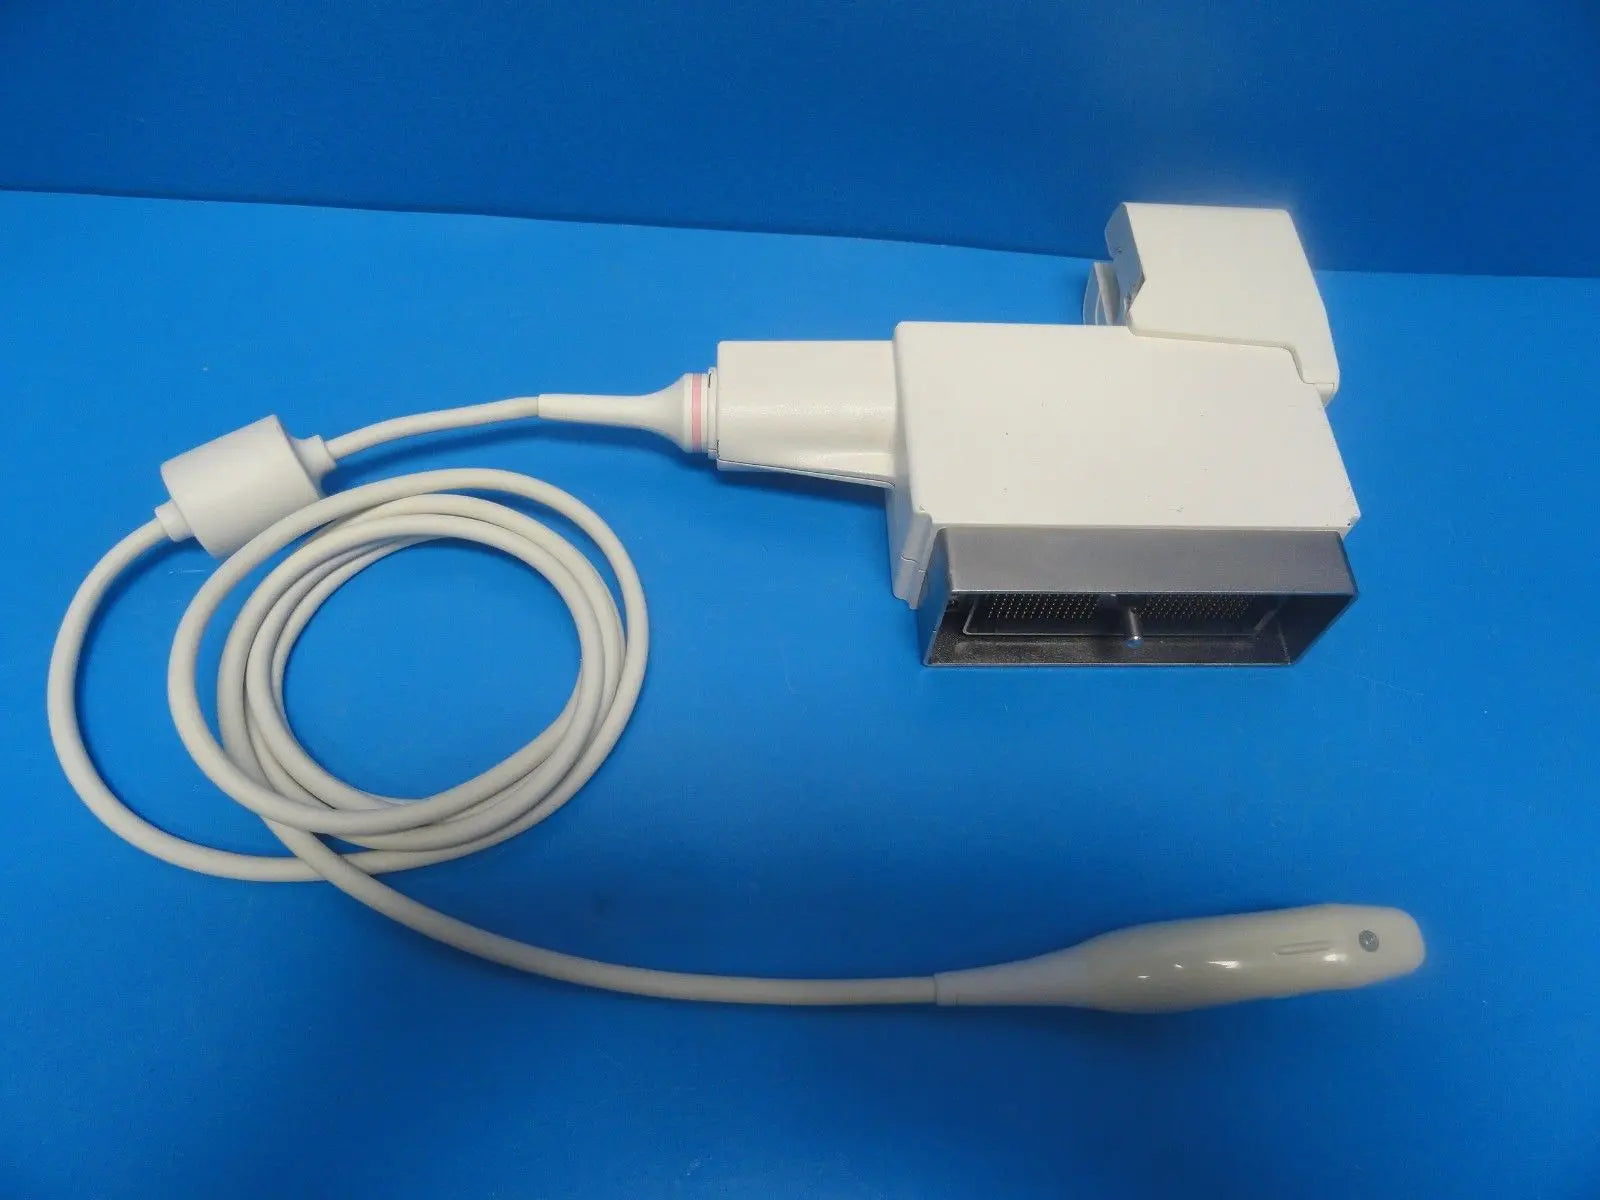 2001 GE 8S P/N 2266327 Cardiac Sector Ultrasound Transducer W/ Hook (6693) DIAGNOSTIC ULTRASOUND MACHINES FOR SALE